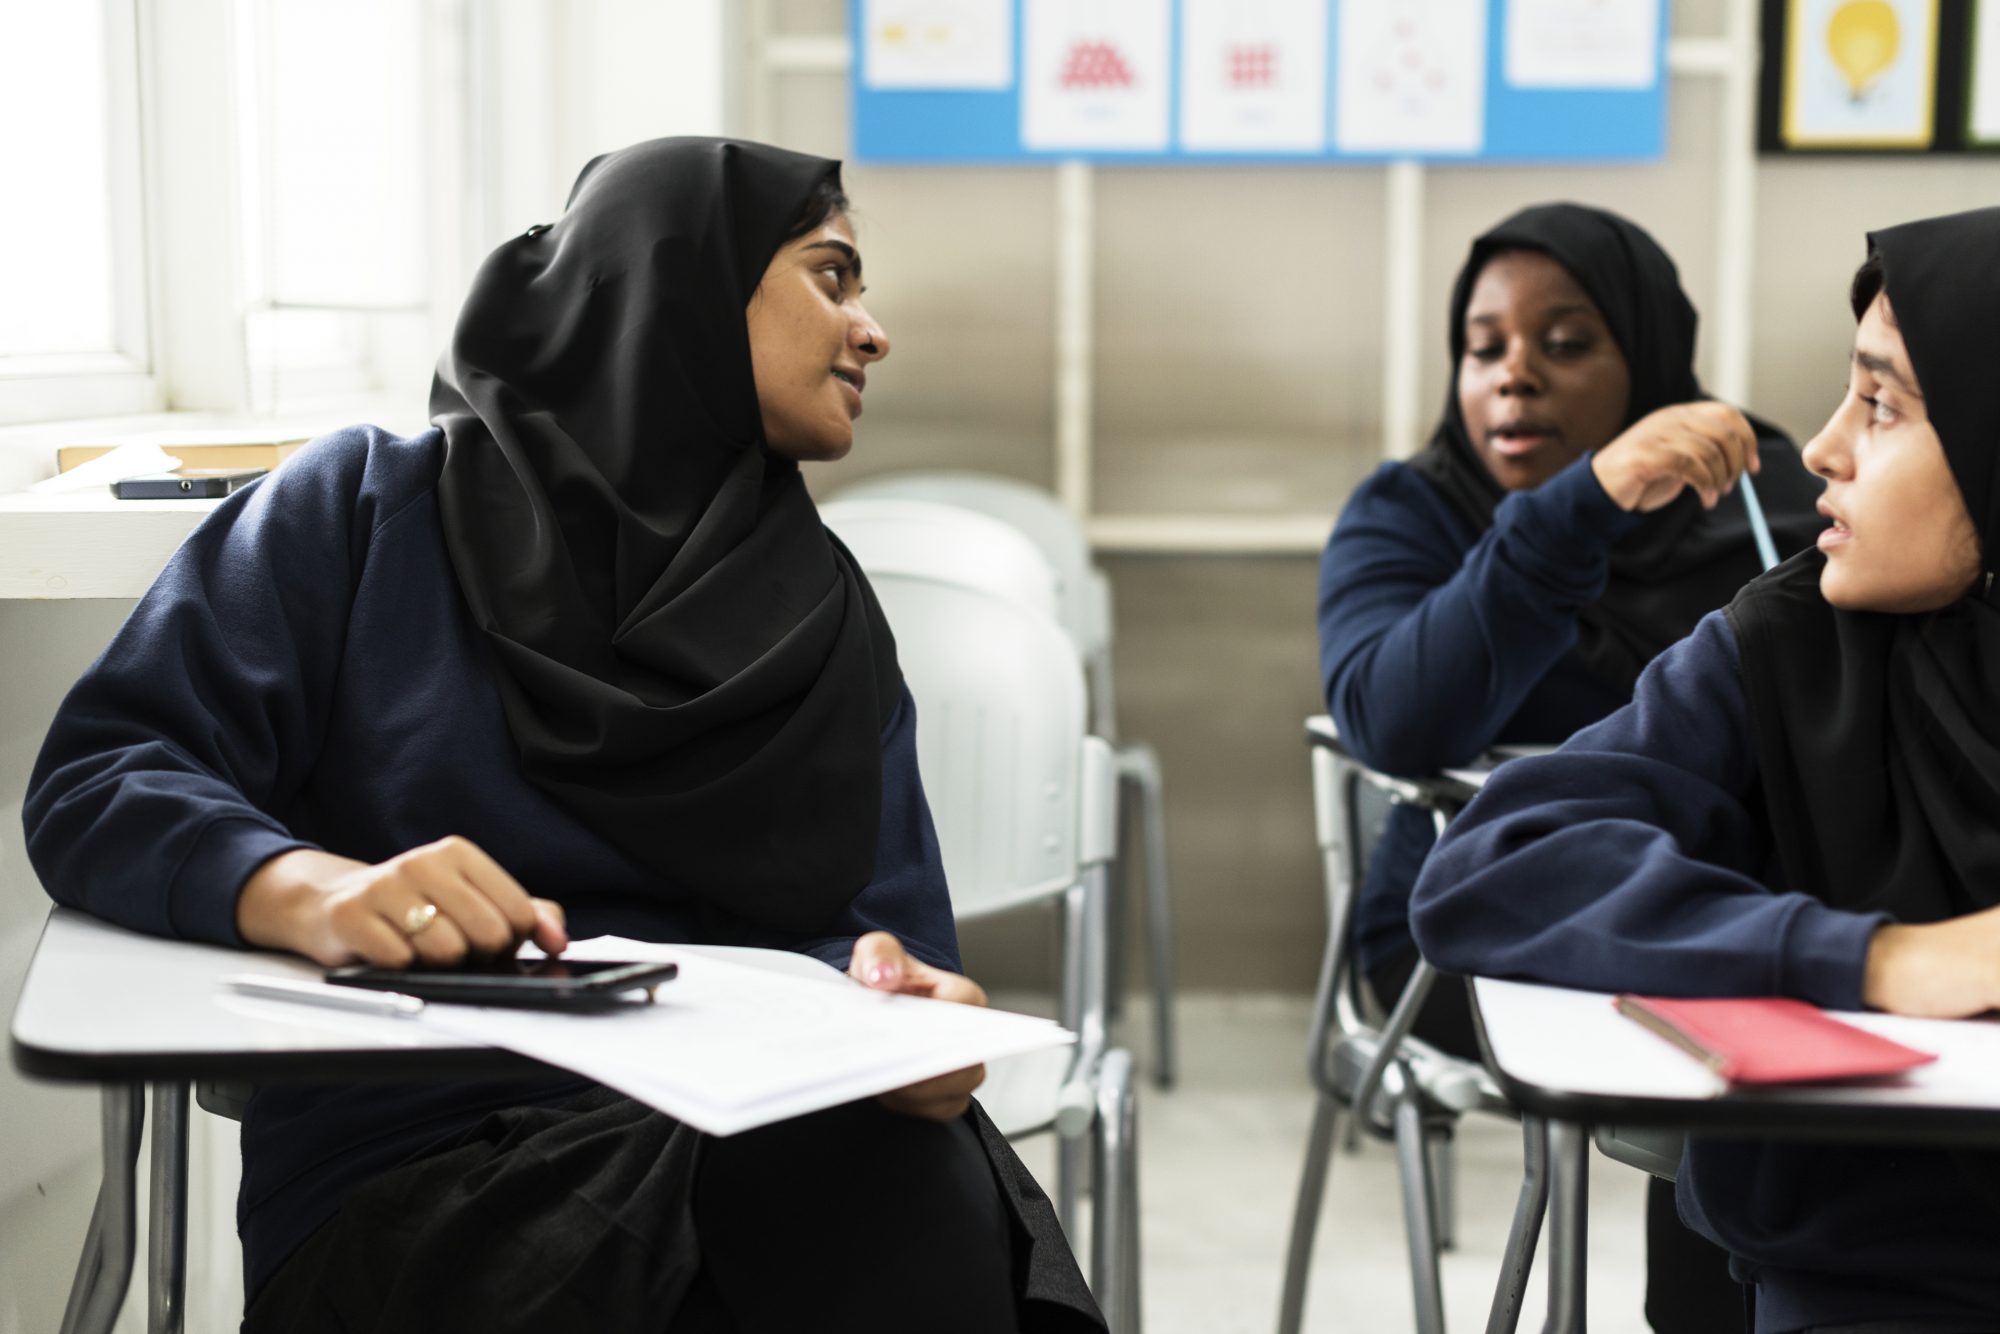 Teenage girls wearing headscarves sitting in classroom and chatting to each other 